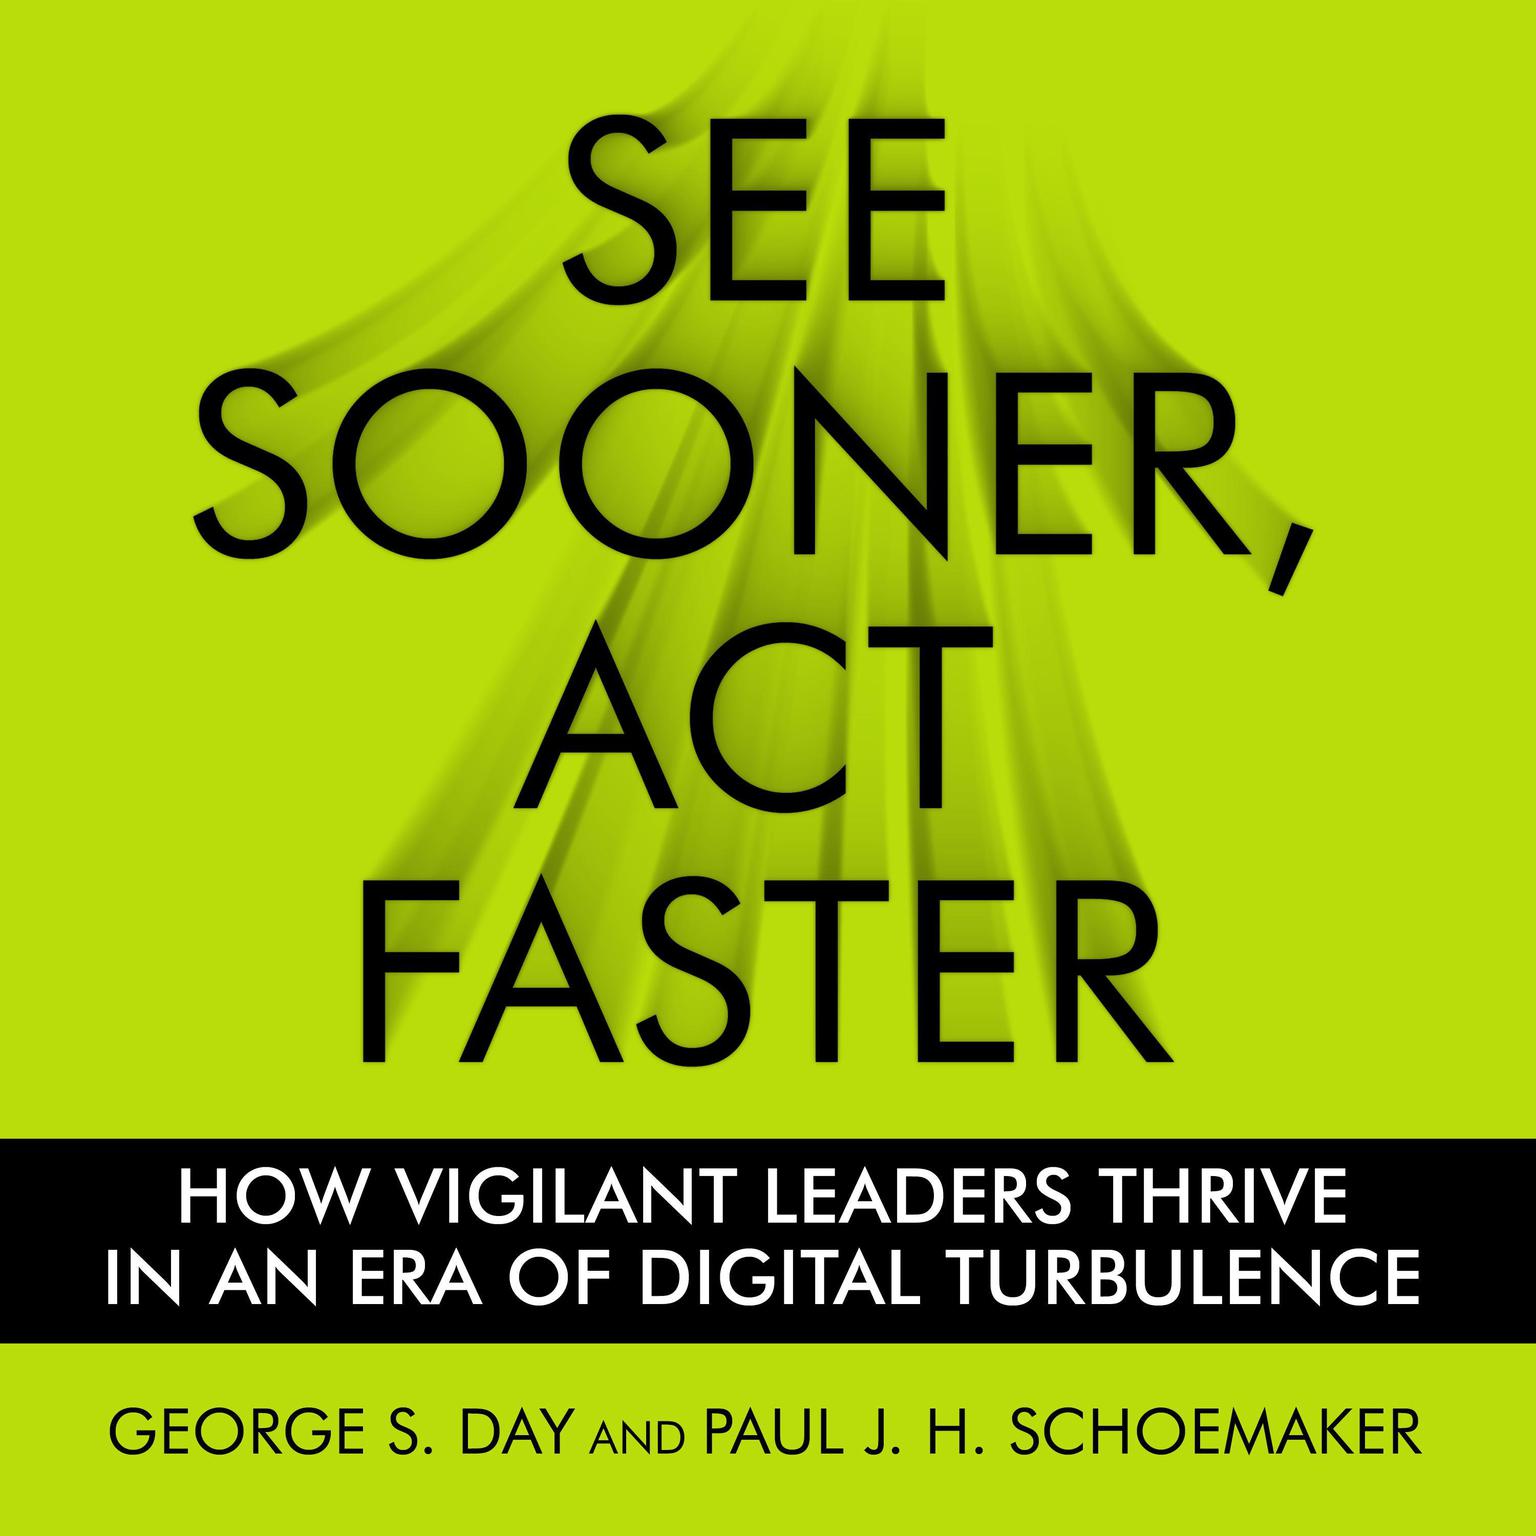 See Sooner, Act Faster: How Vigilant Leaders Thrive in an Era of Digital Turbulence Audiobook, by Paul J. H. Schoemaker